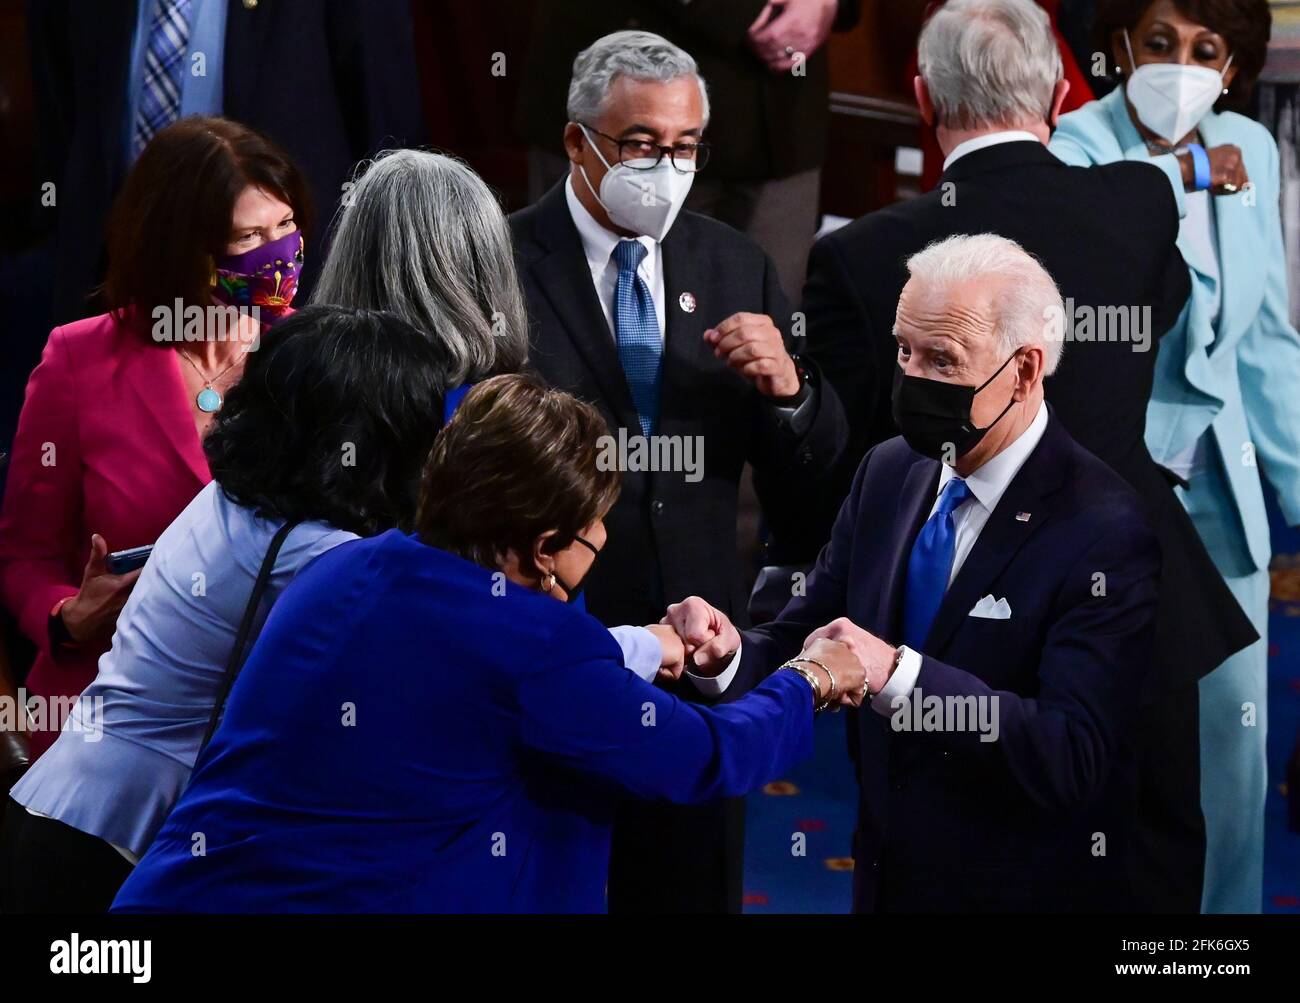 Washington, United States. 28th Apr, 2021. President Joe Biden is greeted by members of the United States House of Representatives after delivering his first joint address to a session of Congress at the U.S. Capitol in Washington DC, on Wednesday, April 28, 2021. Pool photo by Jim Watson/UPI Credit: UPI/Alamy Live News Stock Photo